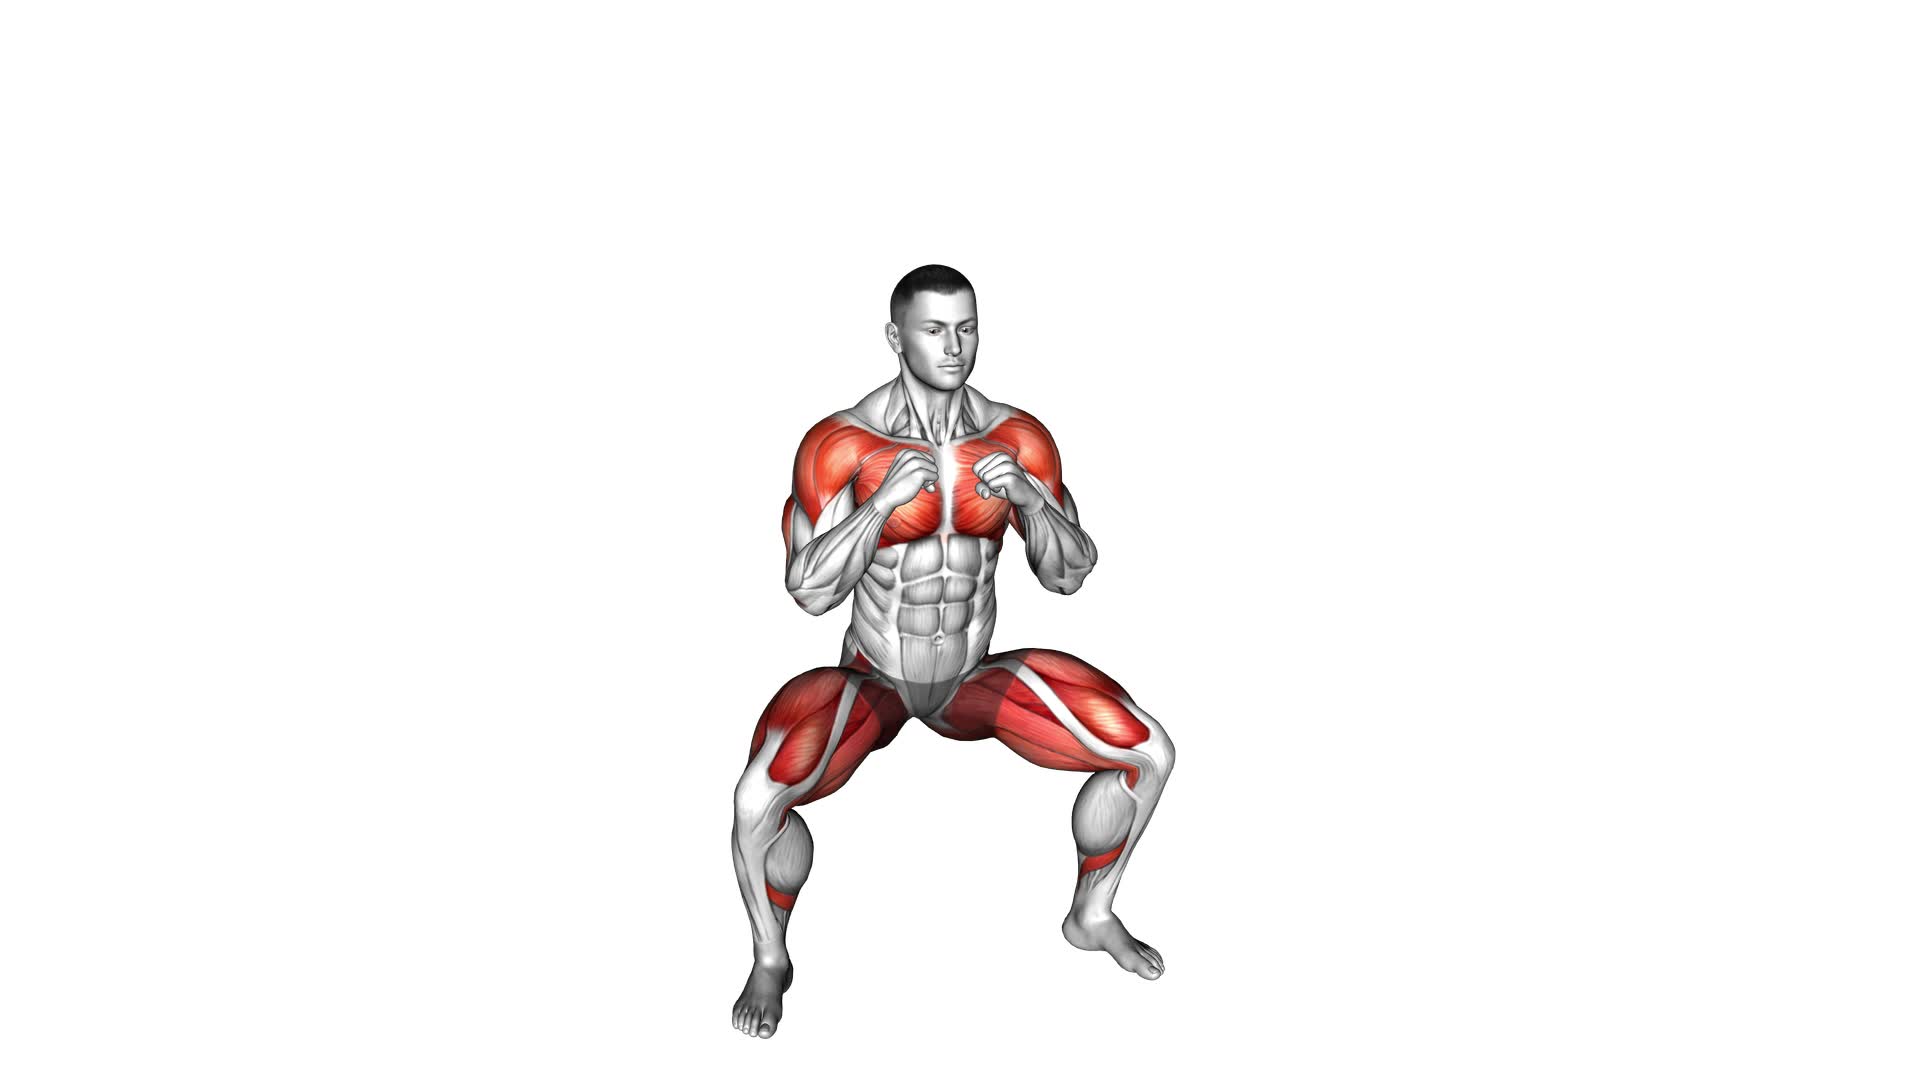 Top Bottom Punch Squat (male) - Video Exercise Guide & Tips